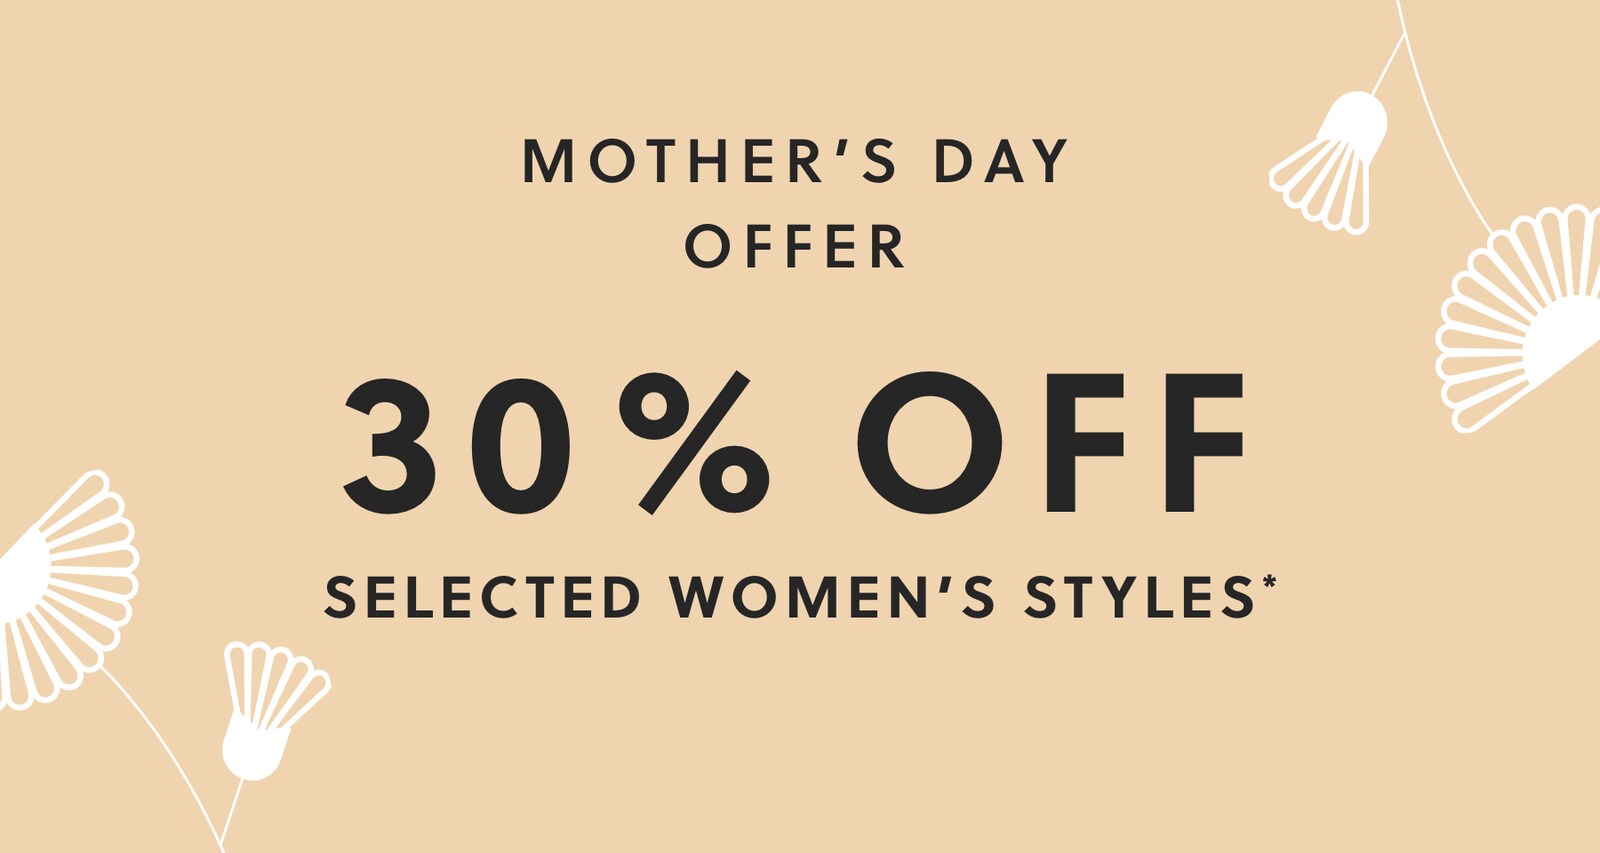 MOTHER'S DAY OFFER. 30% OFF SELECTED WOMEN'S STYLES*